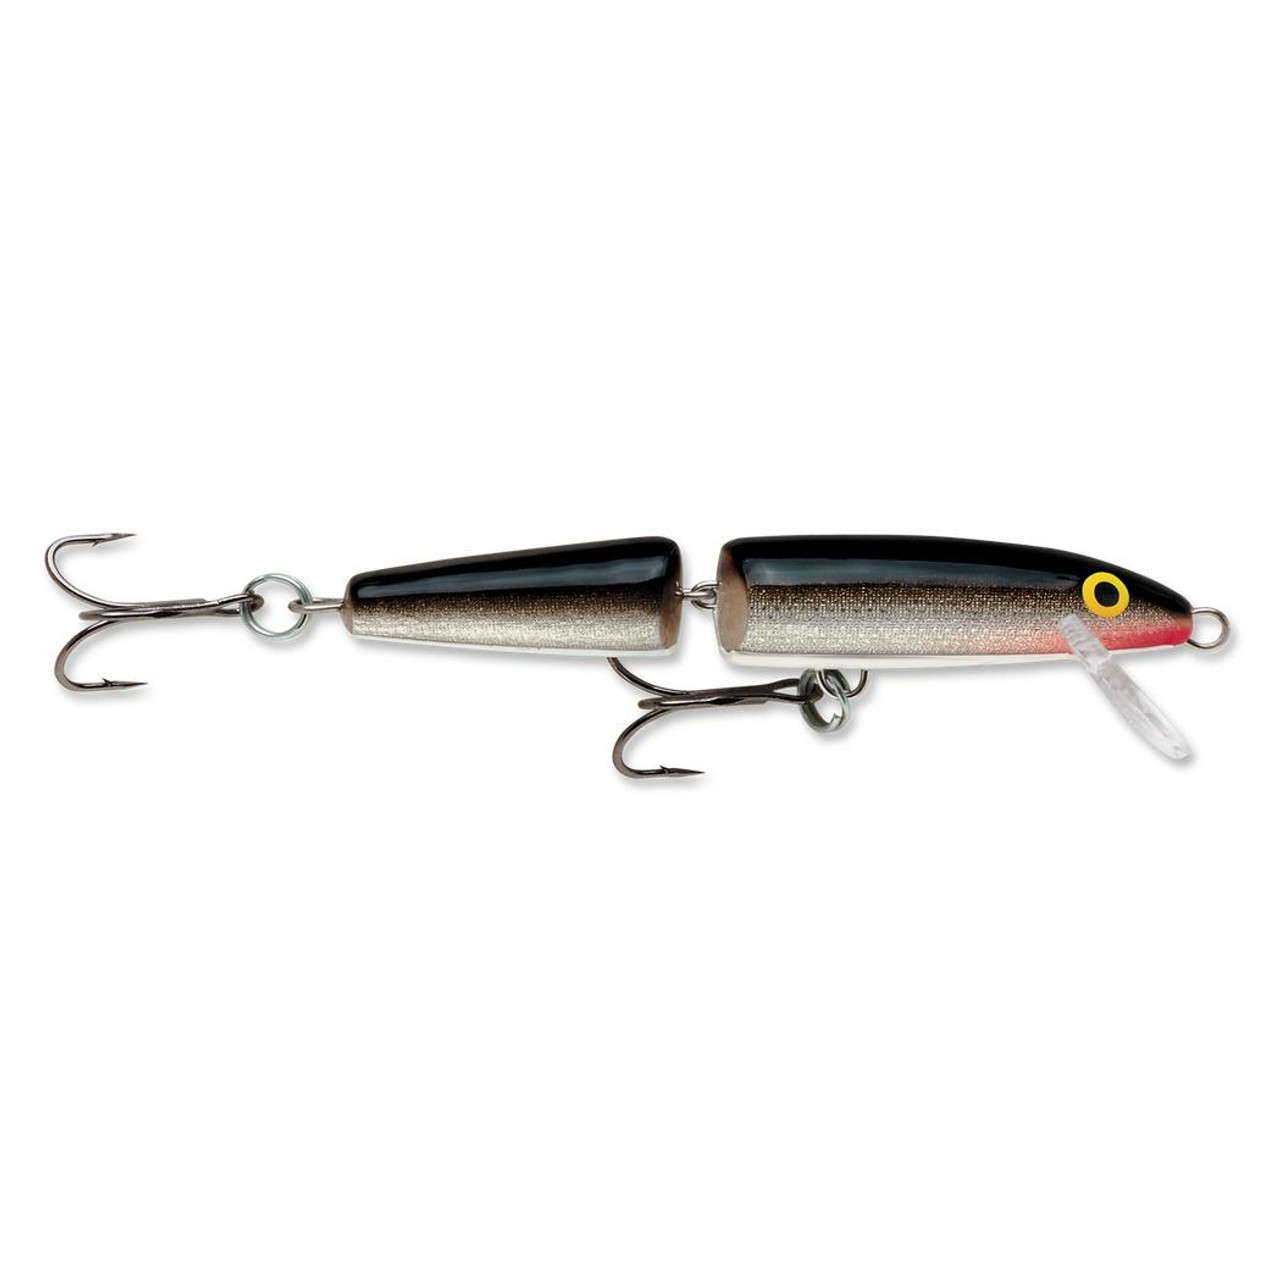 https://cdn11.bigcommerce.com/s-70mih4s/images/stencil/1280x1280/products/5235/64760/Rapala-11-Original-Rapala-Jointed-Floating-Jerkbait-022677003504_image3__67334.1711564156.jpg?c=2